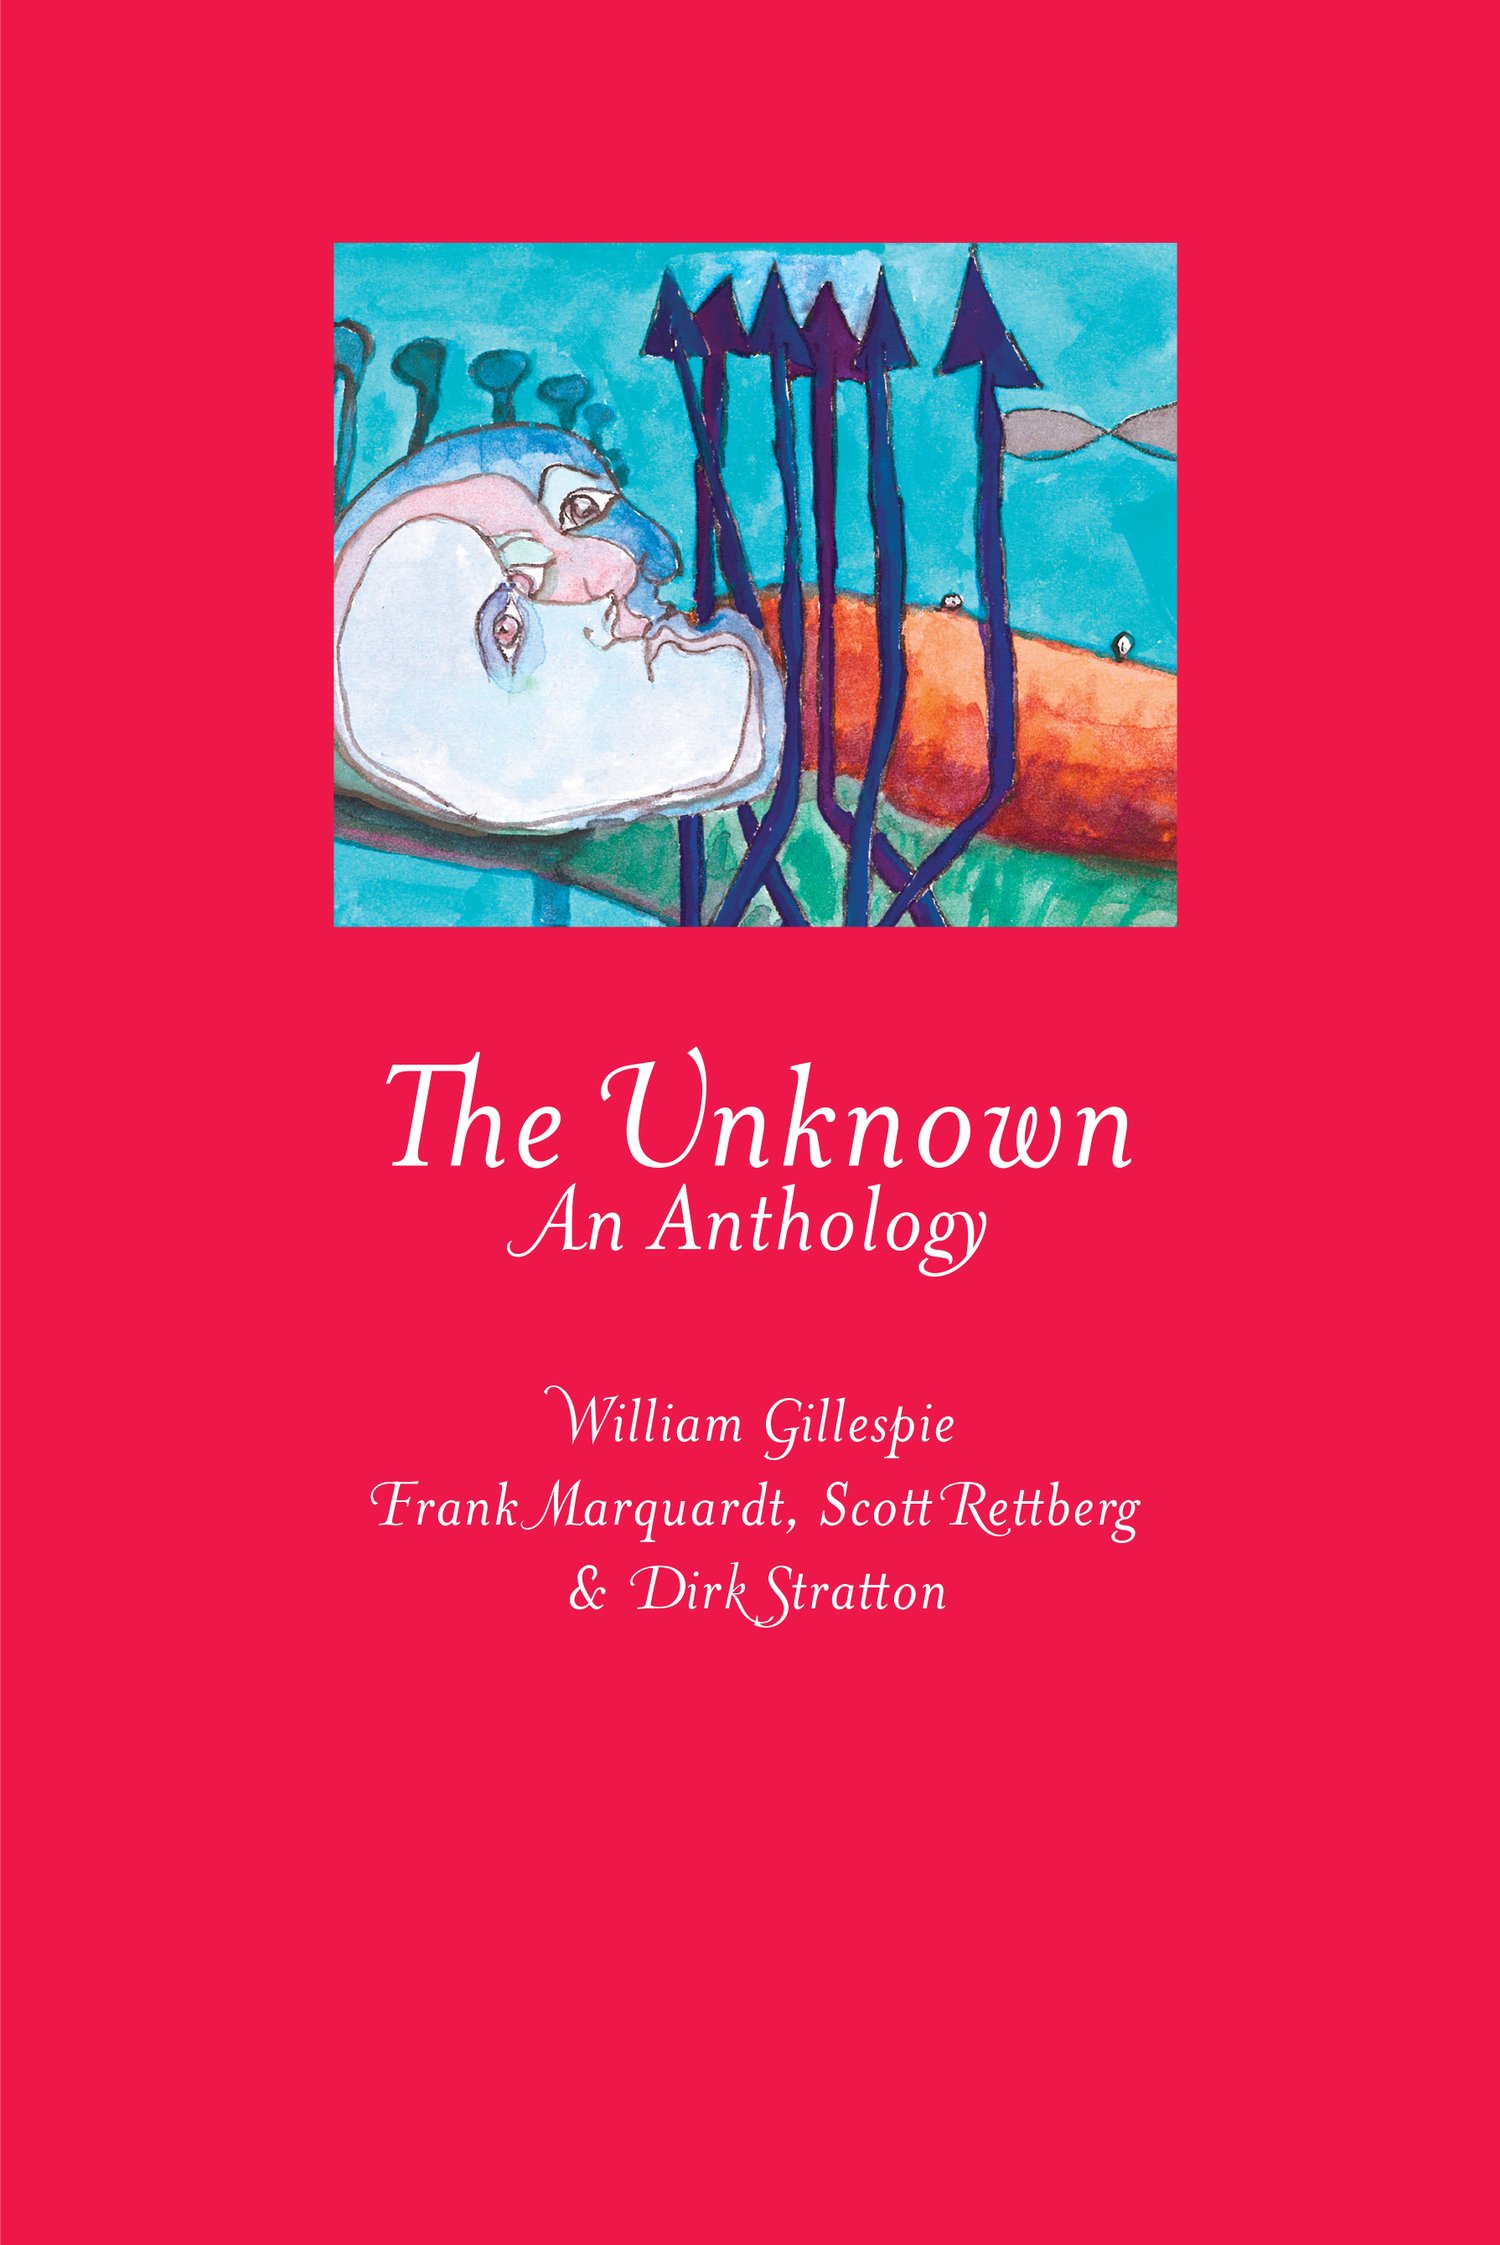 Image of The Unknown: An Anthology, by William Gillespie, Frank Marquardt, Scott Rettberg, and Drik Stratton